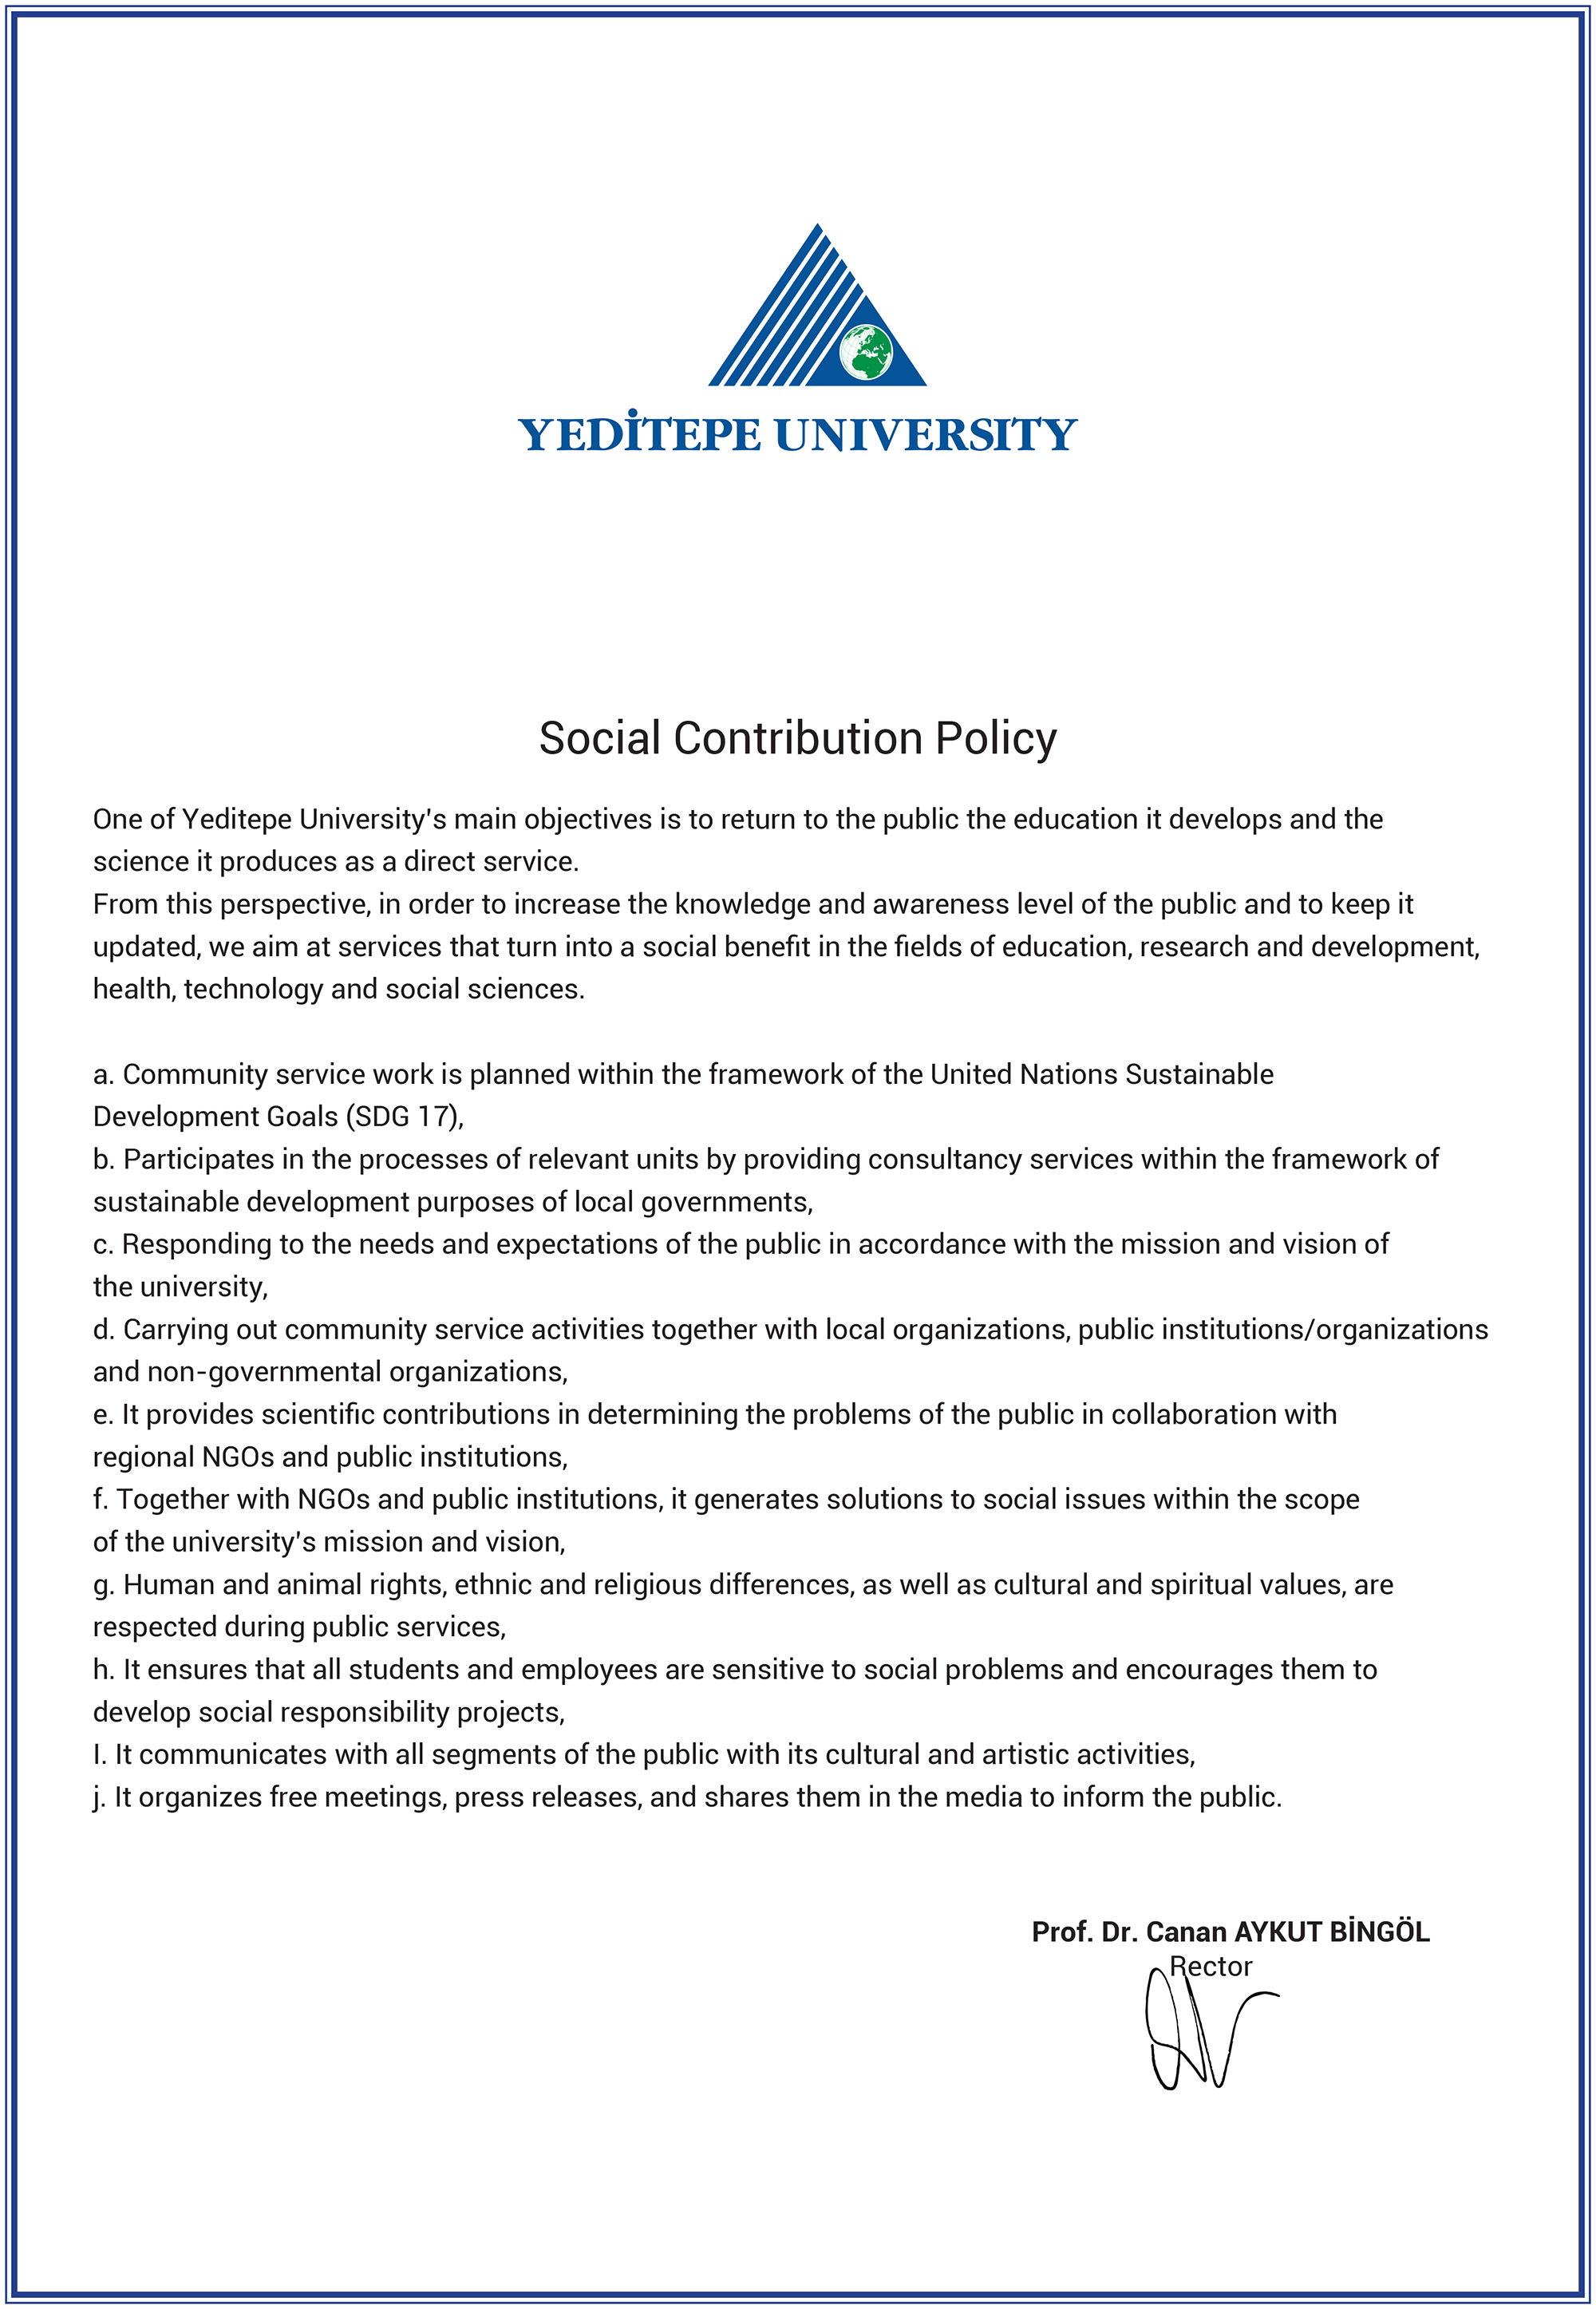 social_contribution_policy